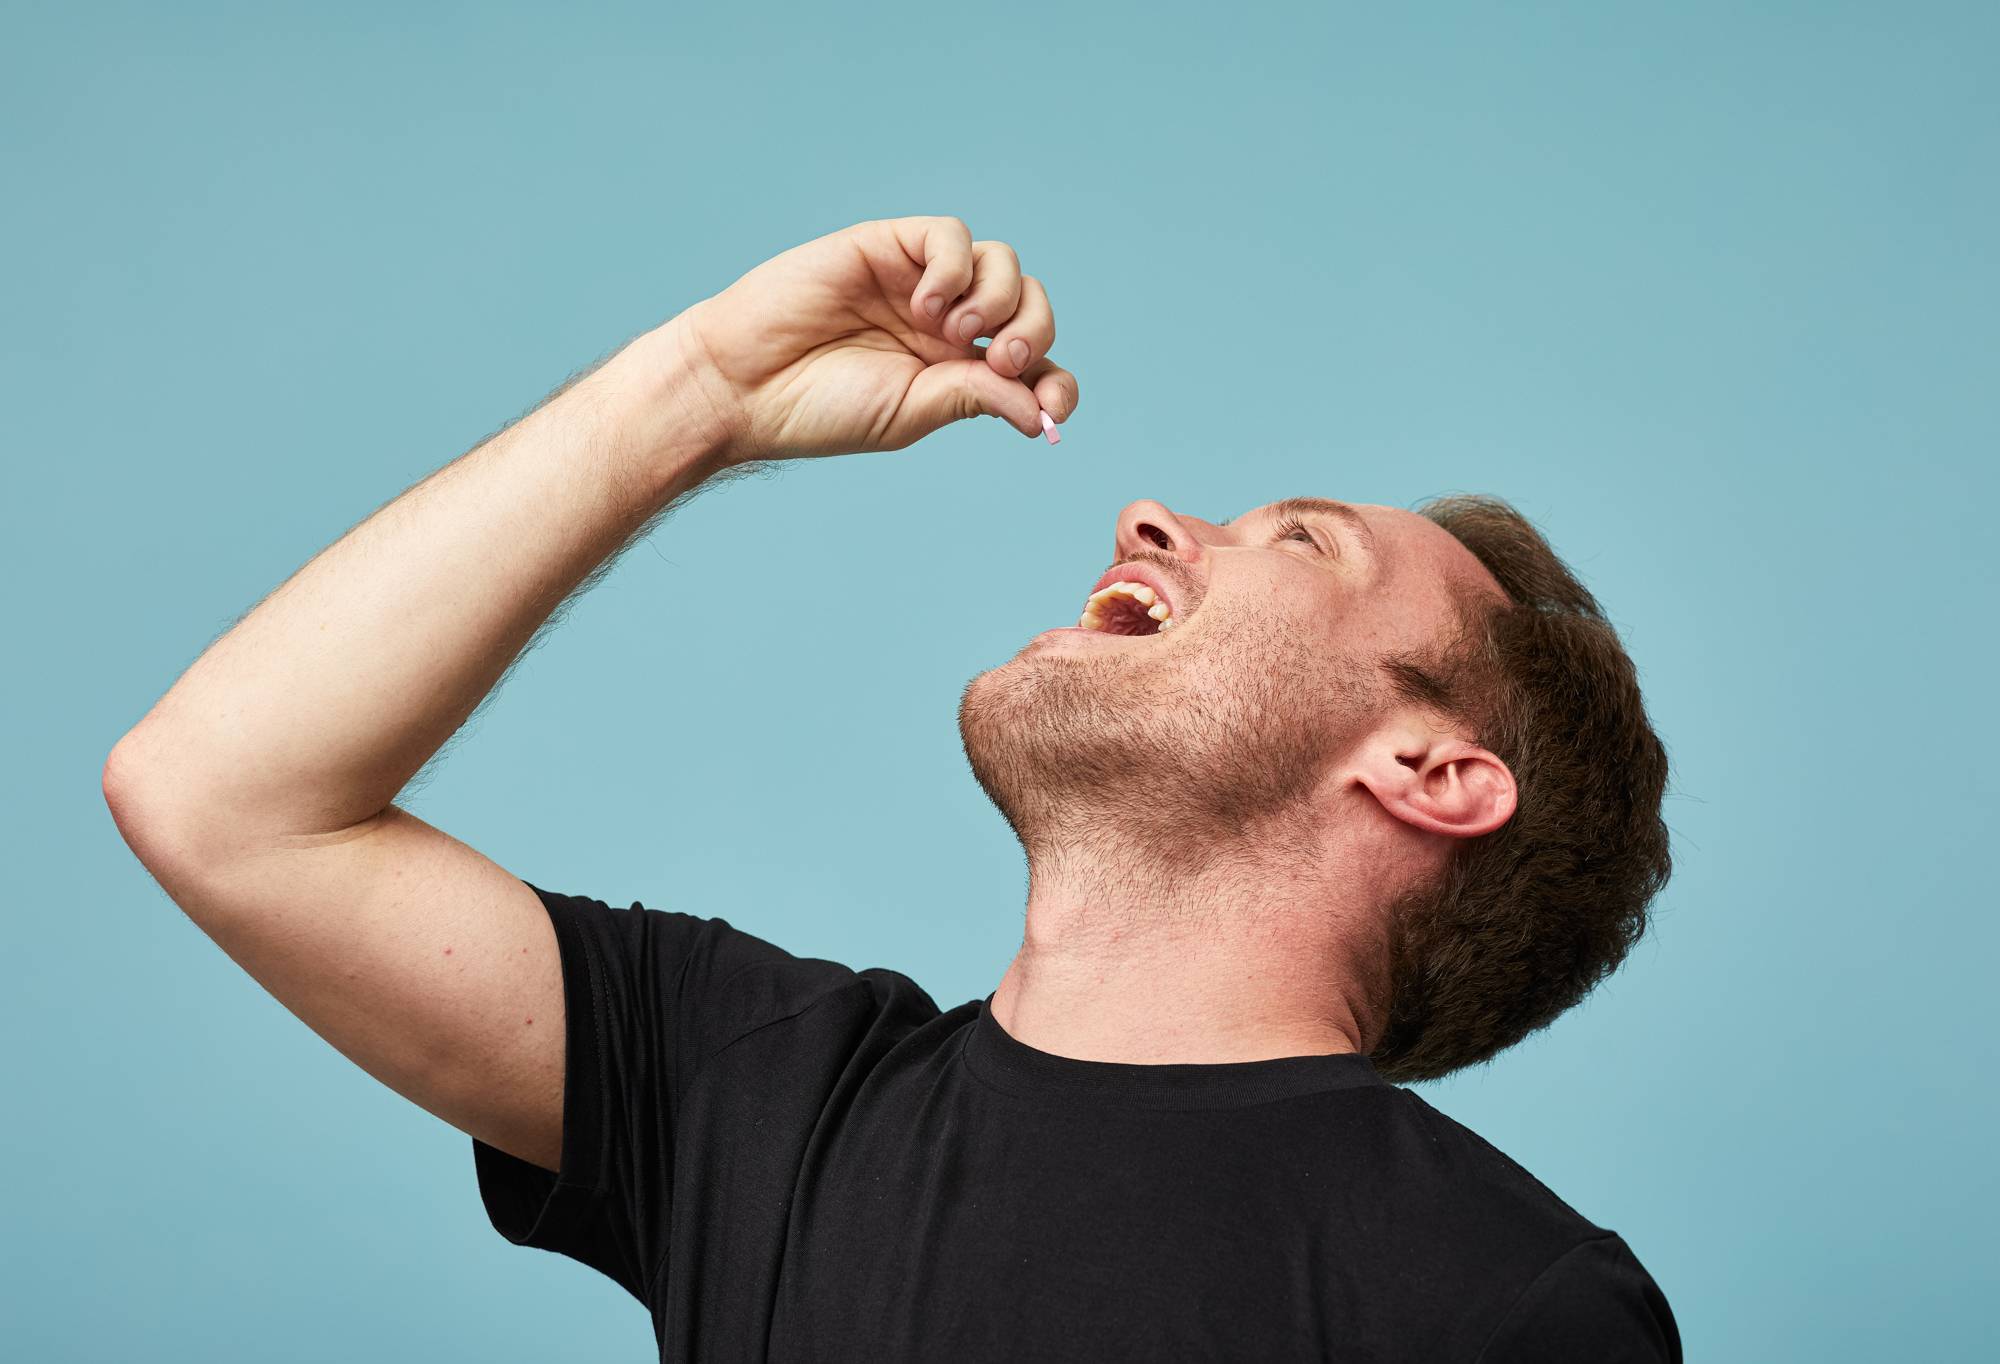 A person prepares to put a small pink mouthwash tab into their open mouth with their hand.